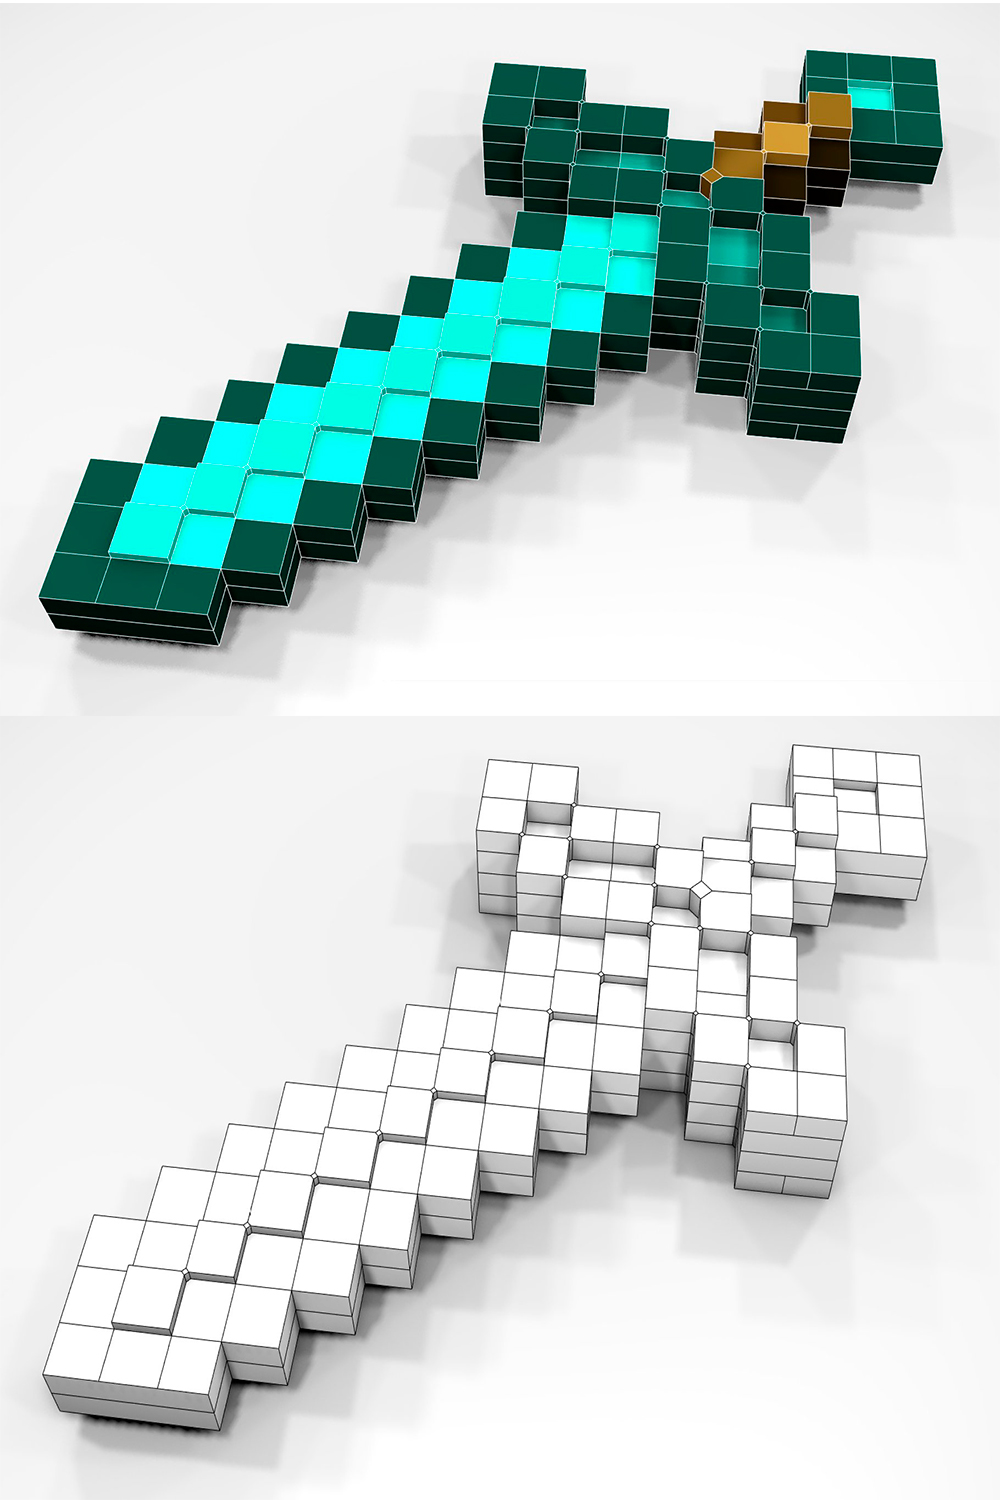 Beautiful 3d models of a diamond sword in the style of Minecraft